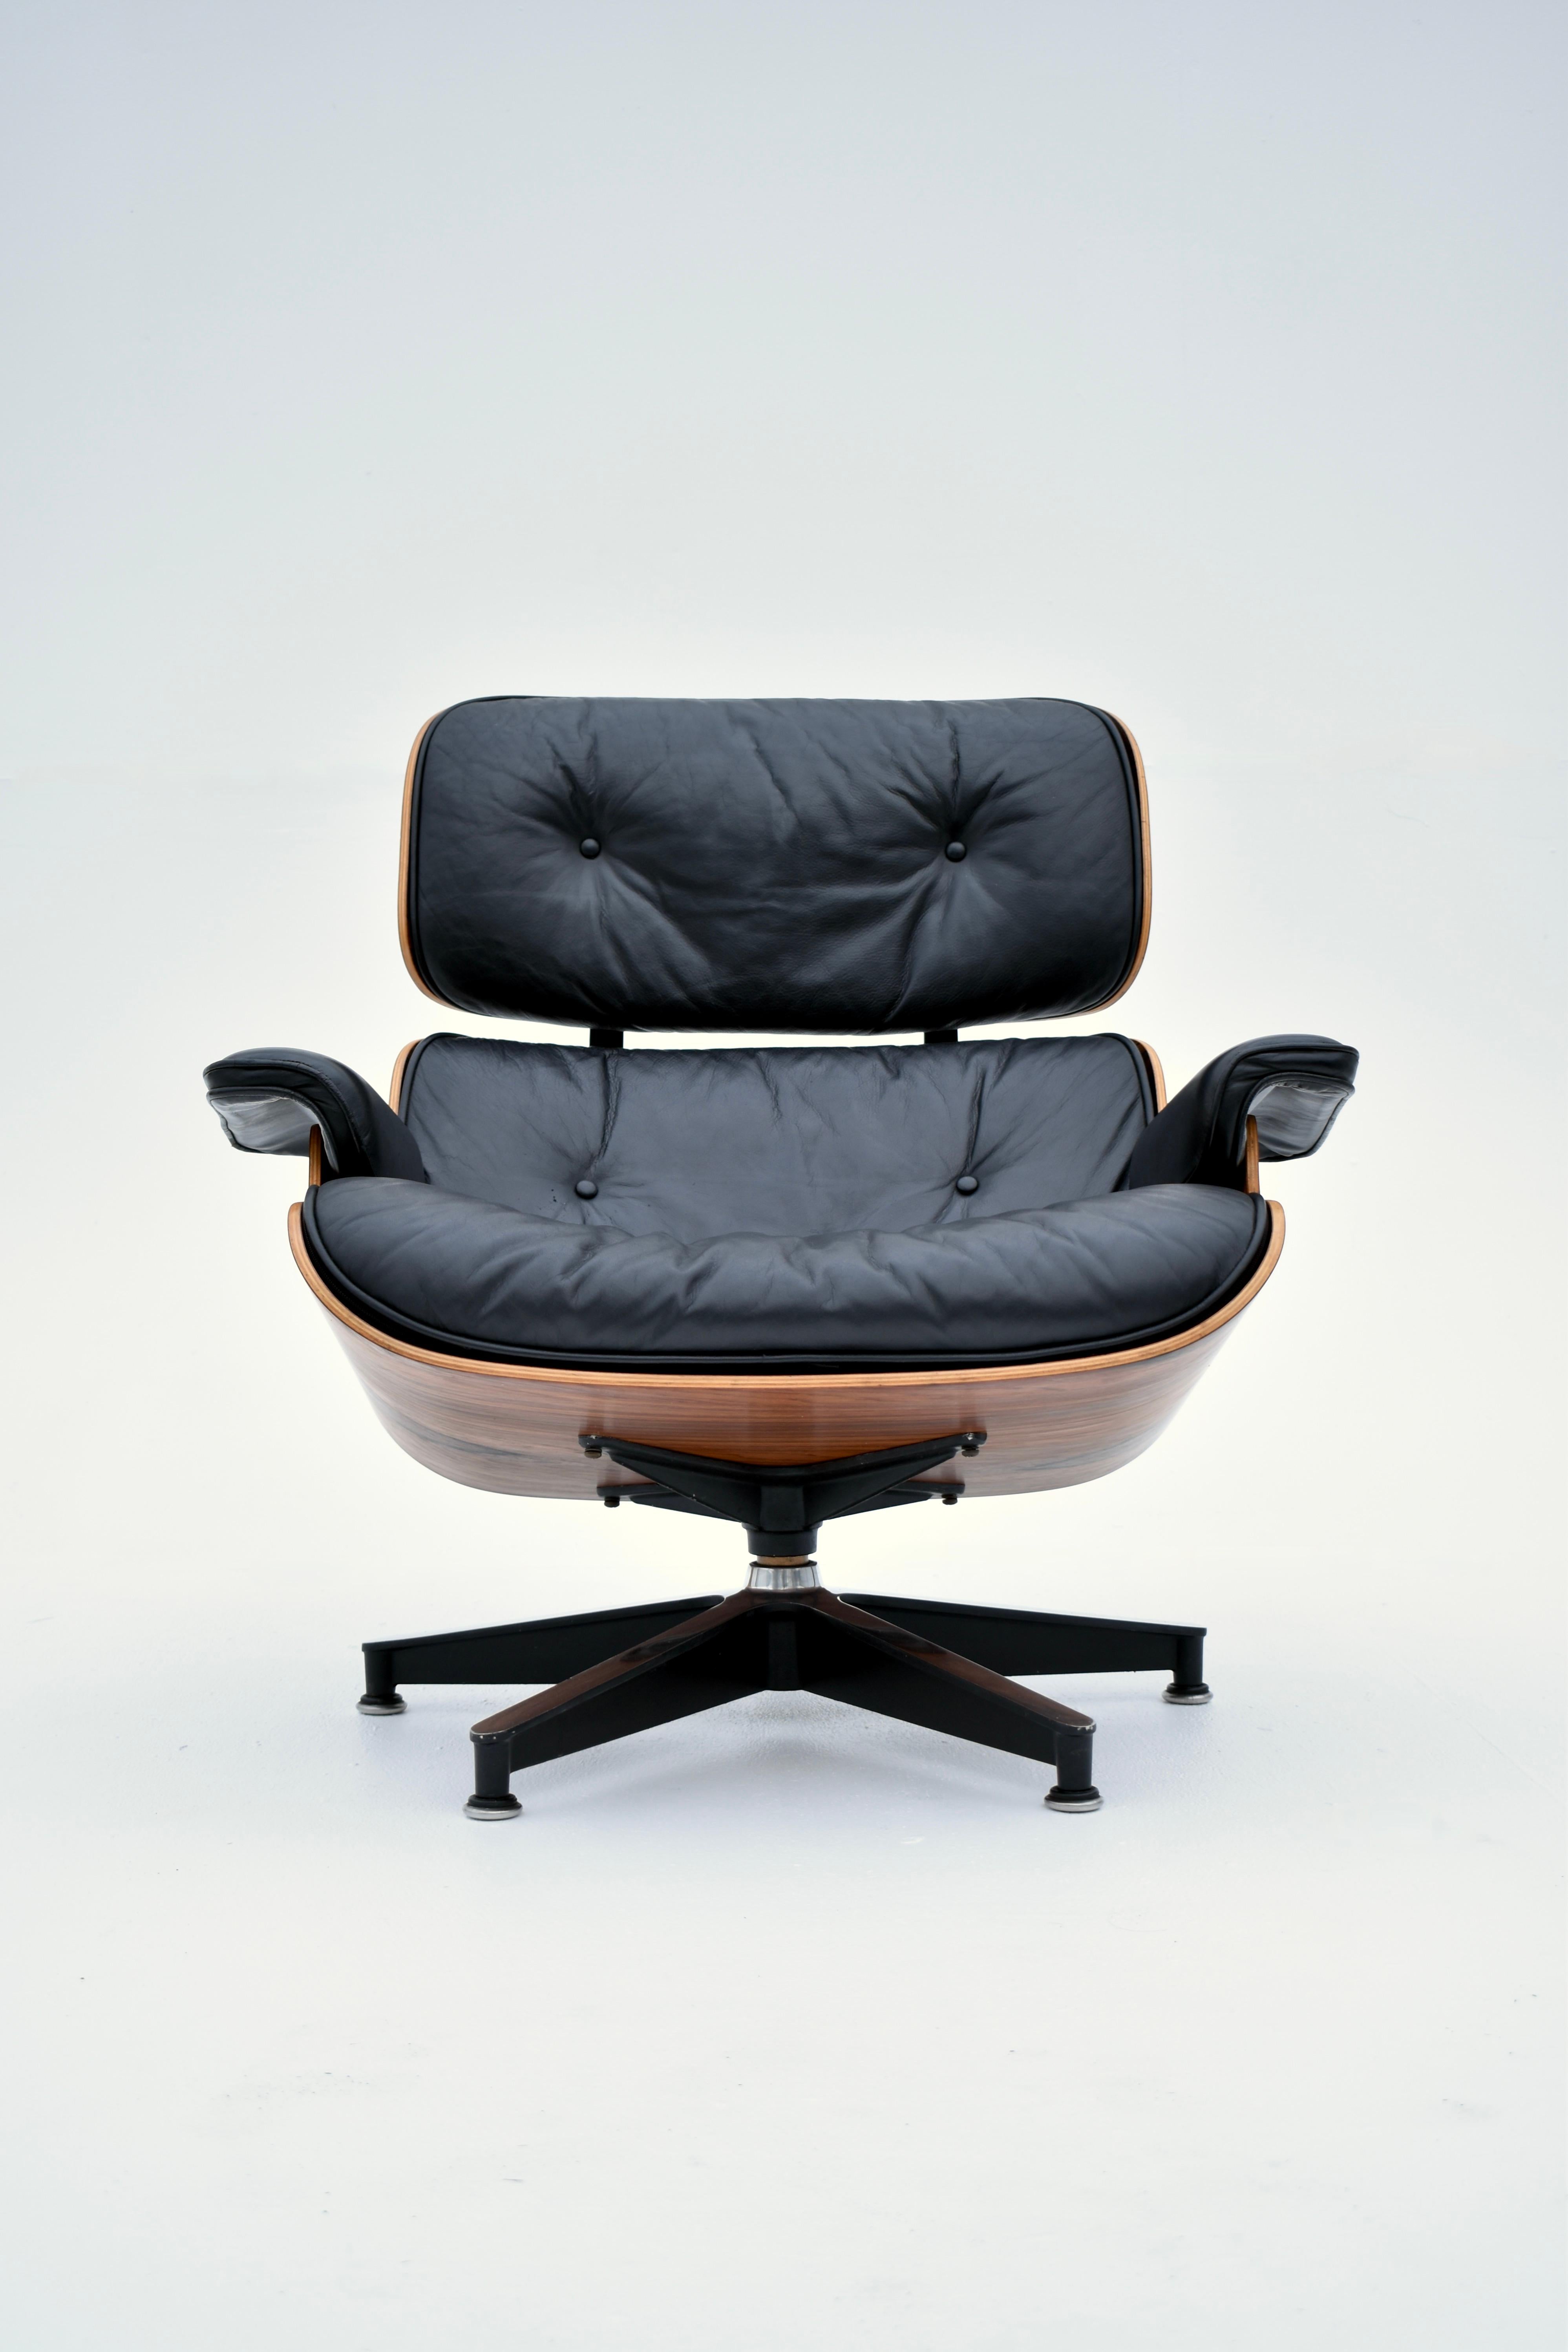 Original 1960's Production Eames Lounge Chair For Herman Miller 7